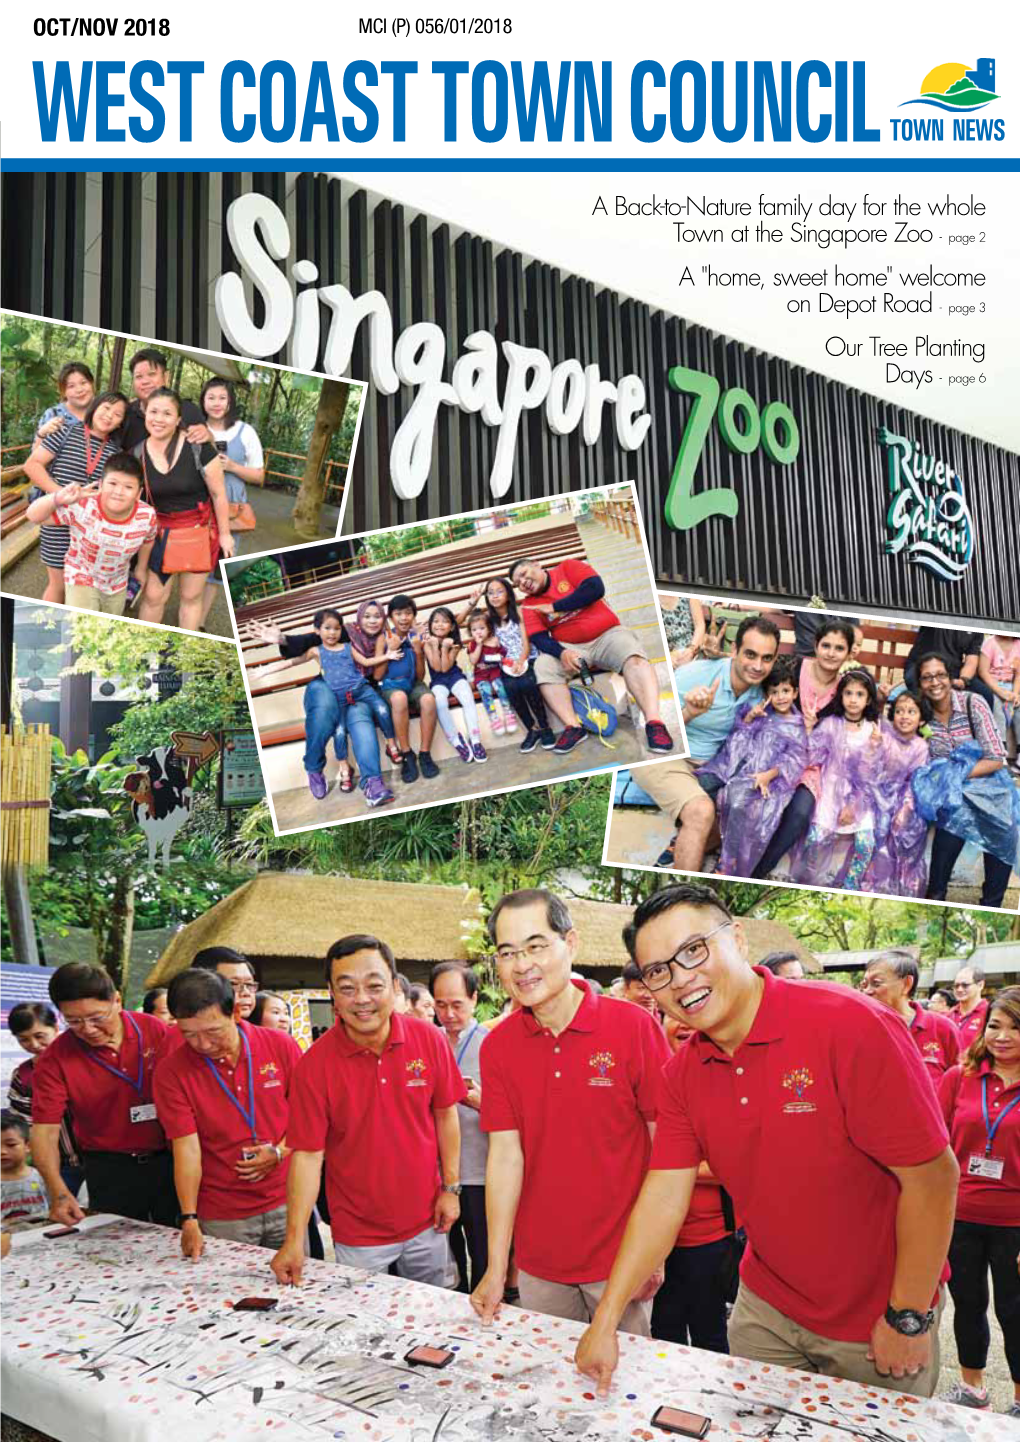 A Back-To-Nature Family Day for the Whole Town at the Singapore Zoo - Page 2 a "Home, Sweet Home" Welcome on Depot Road - Page 3 Our Tree Planting Days - Page 6